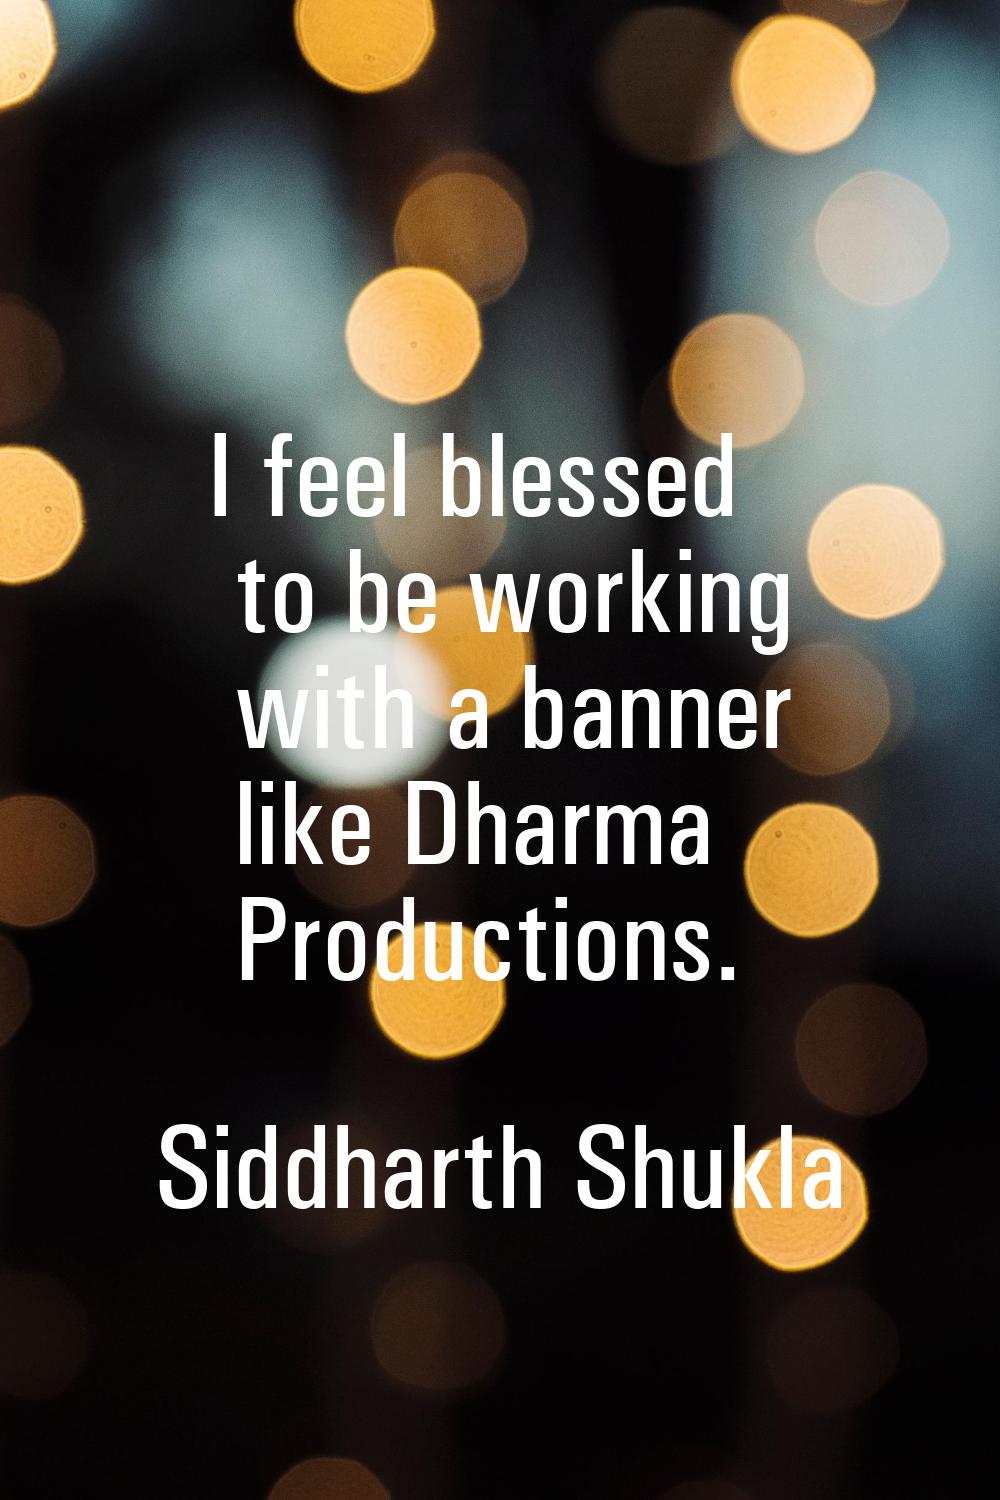 I feel blessed to be working with a banner like Dharma Productions.